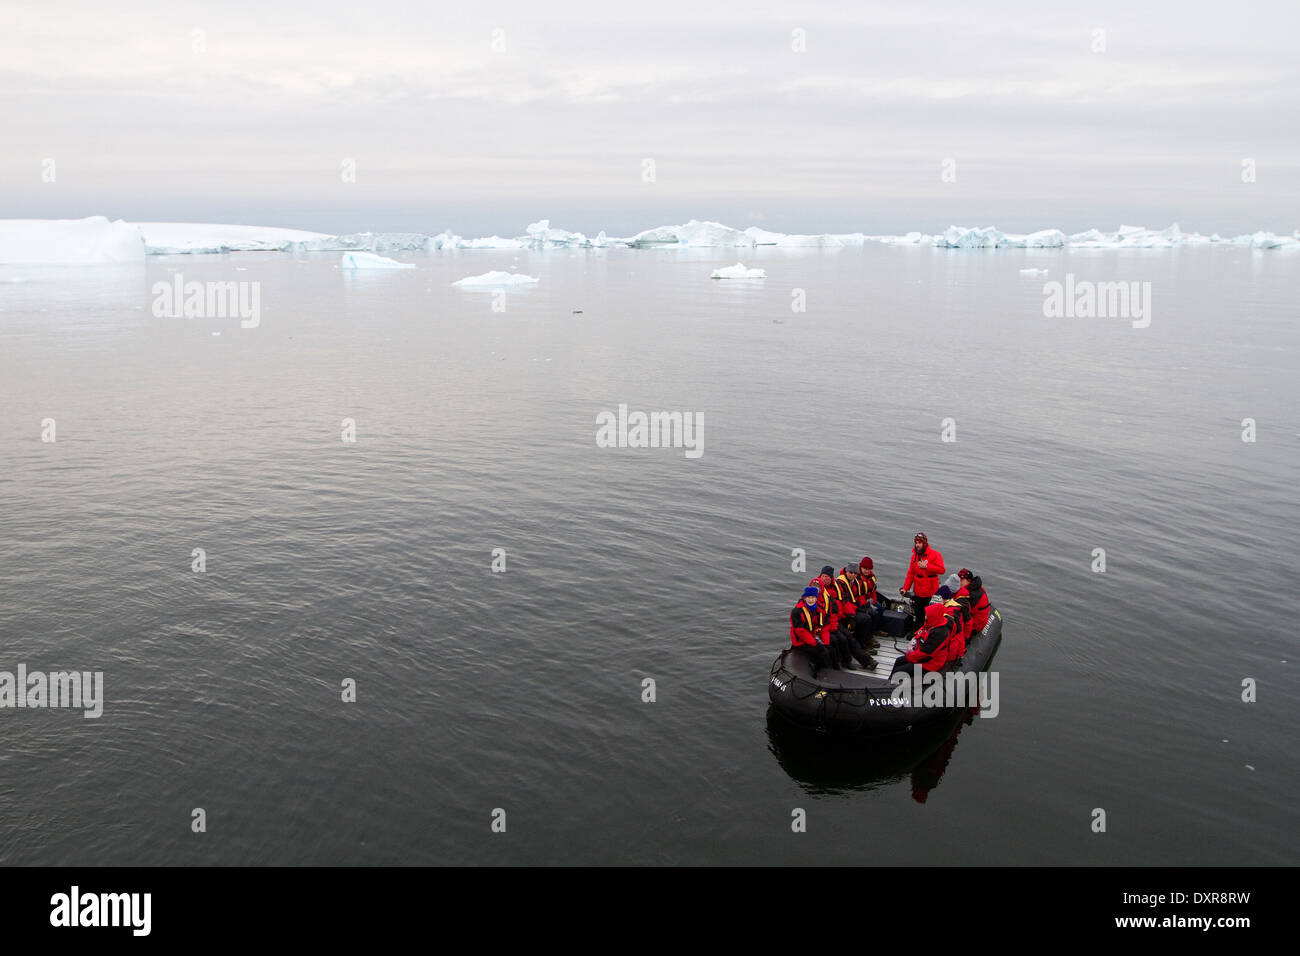 Antarctica cruise ship tourism among the landscape of Antarctic iceberg, icebergs, glacier, and ice with tourists in zodiac. Stock Photo